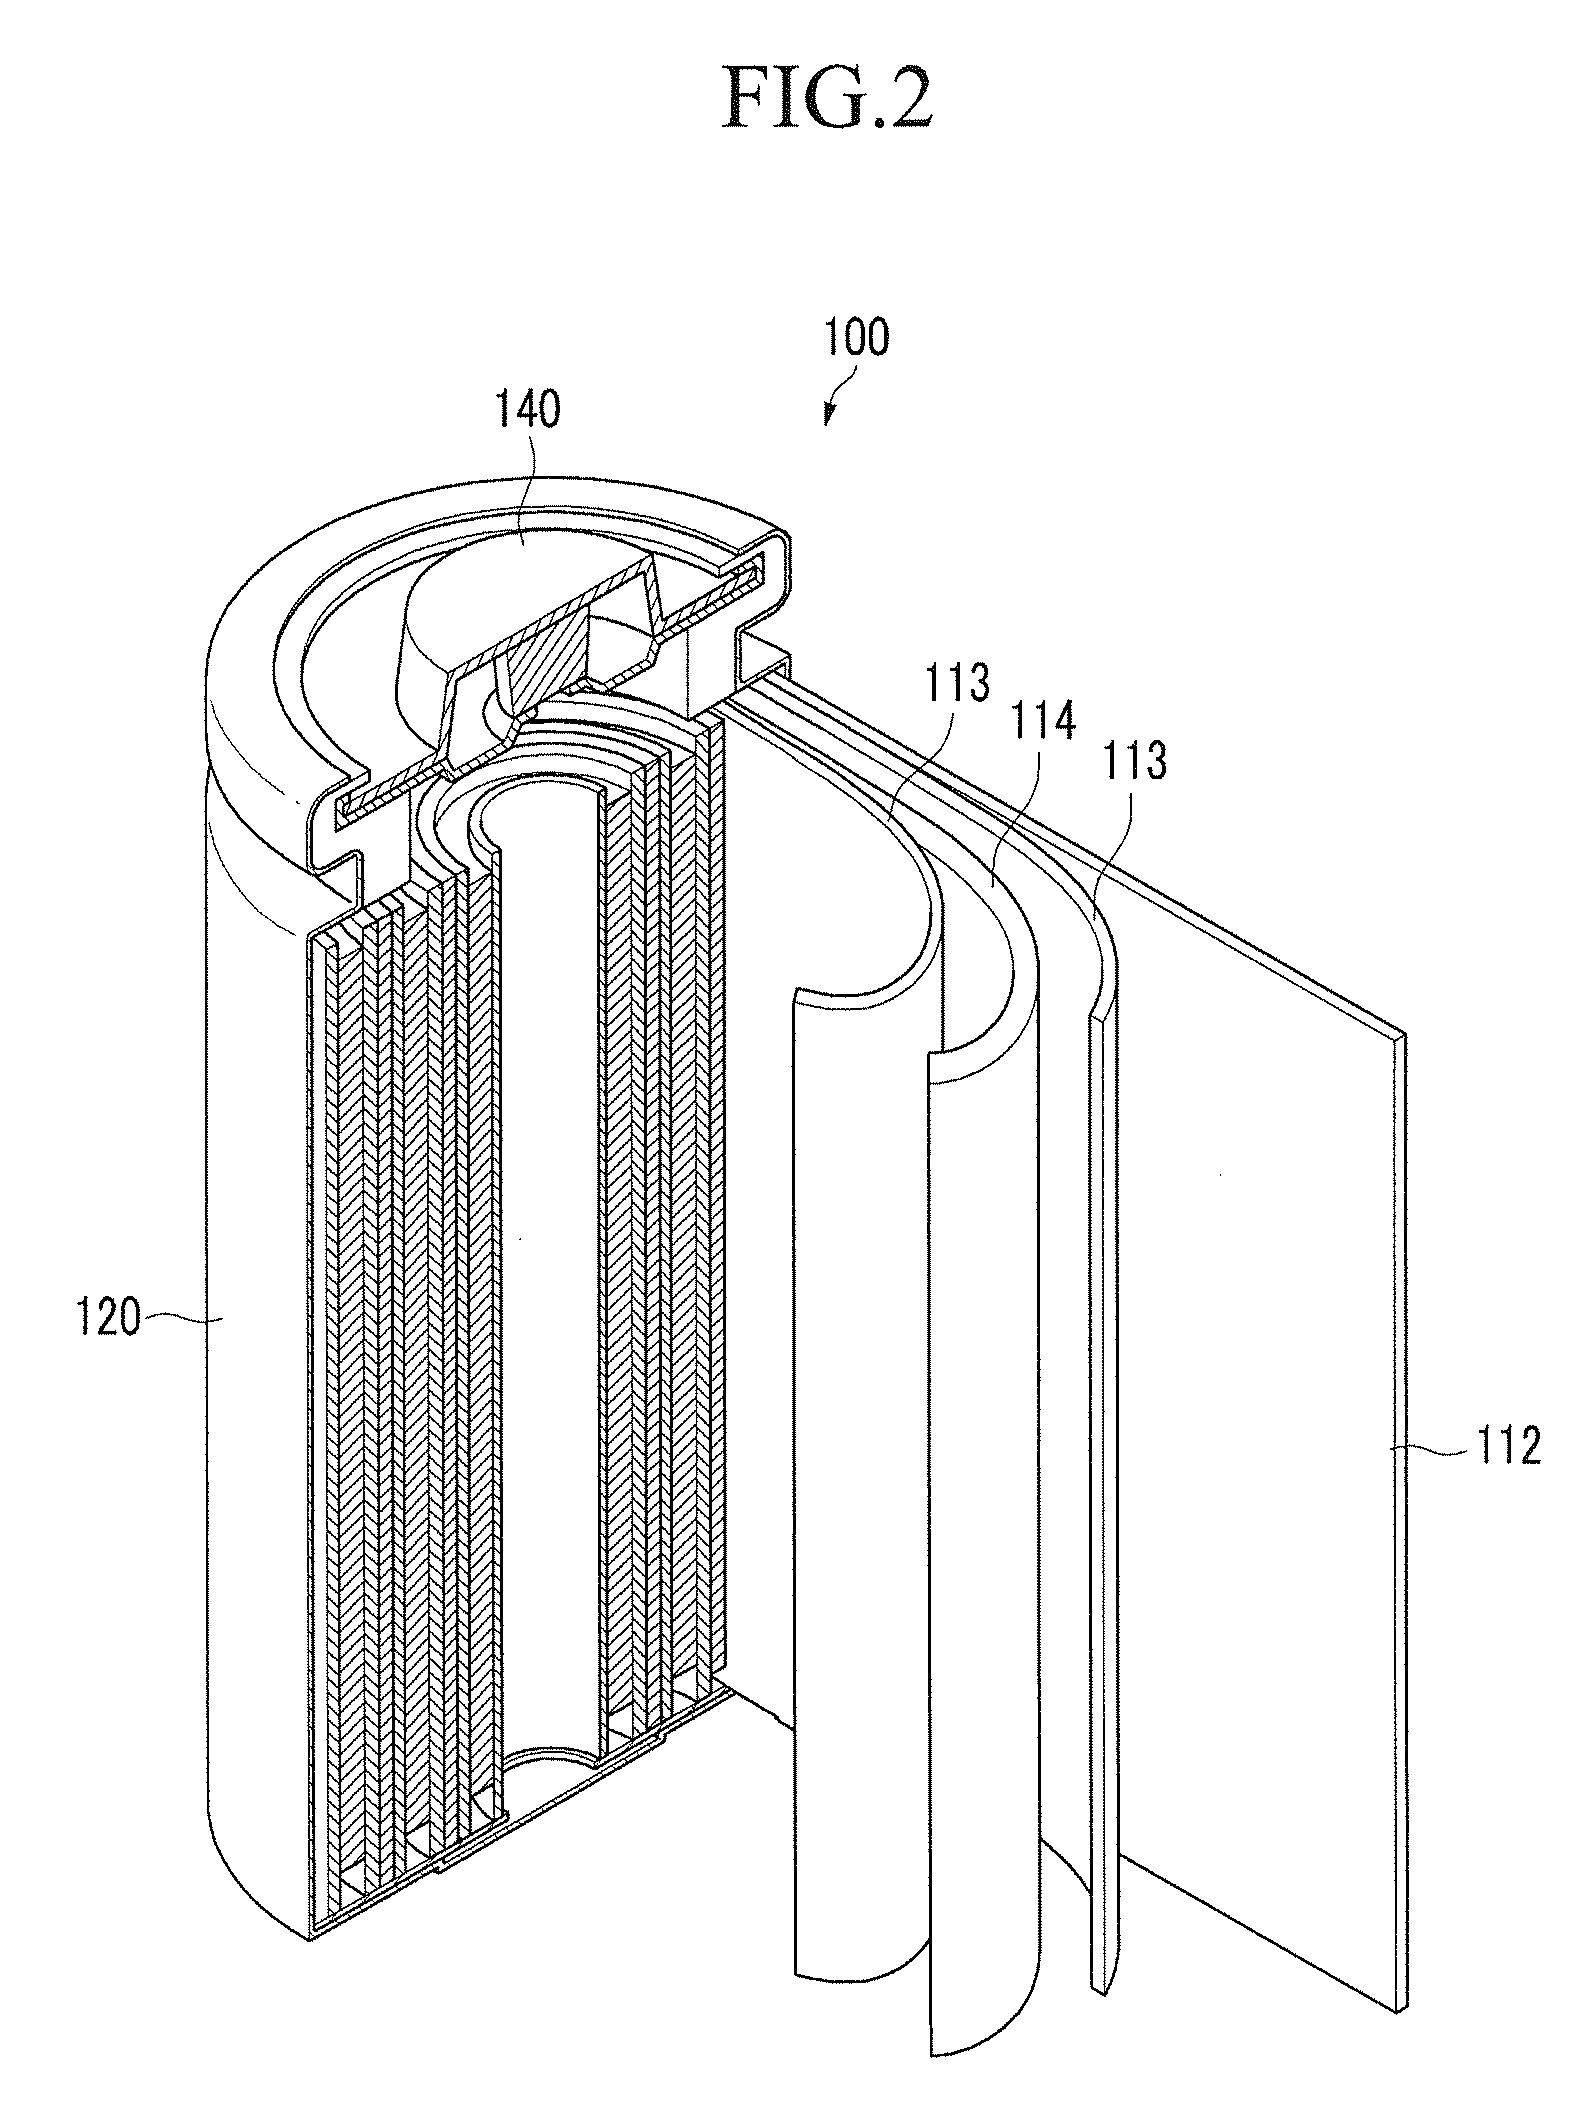 Negative active material for rechargeable lithium battery, and method of preparing the same